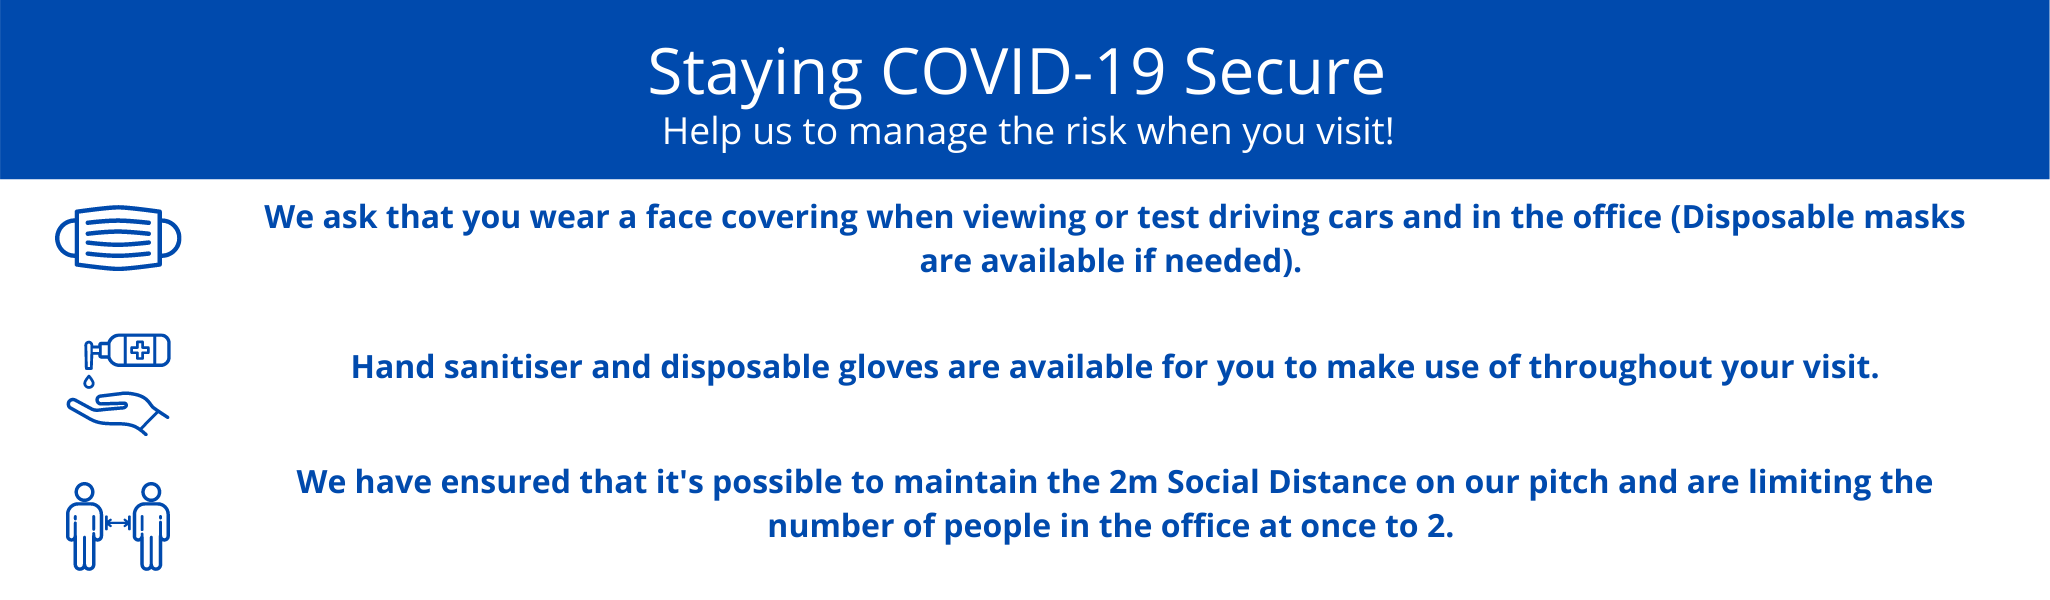 Staying COVID Secure